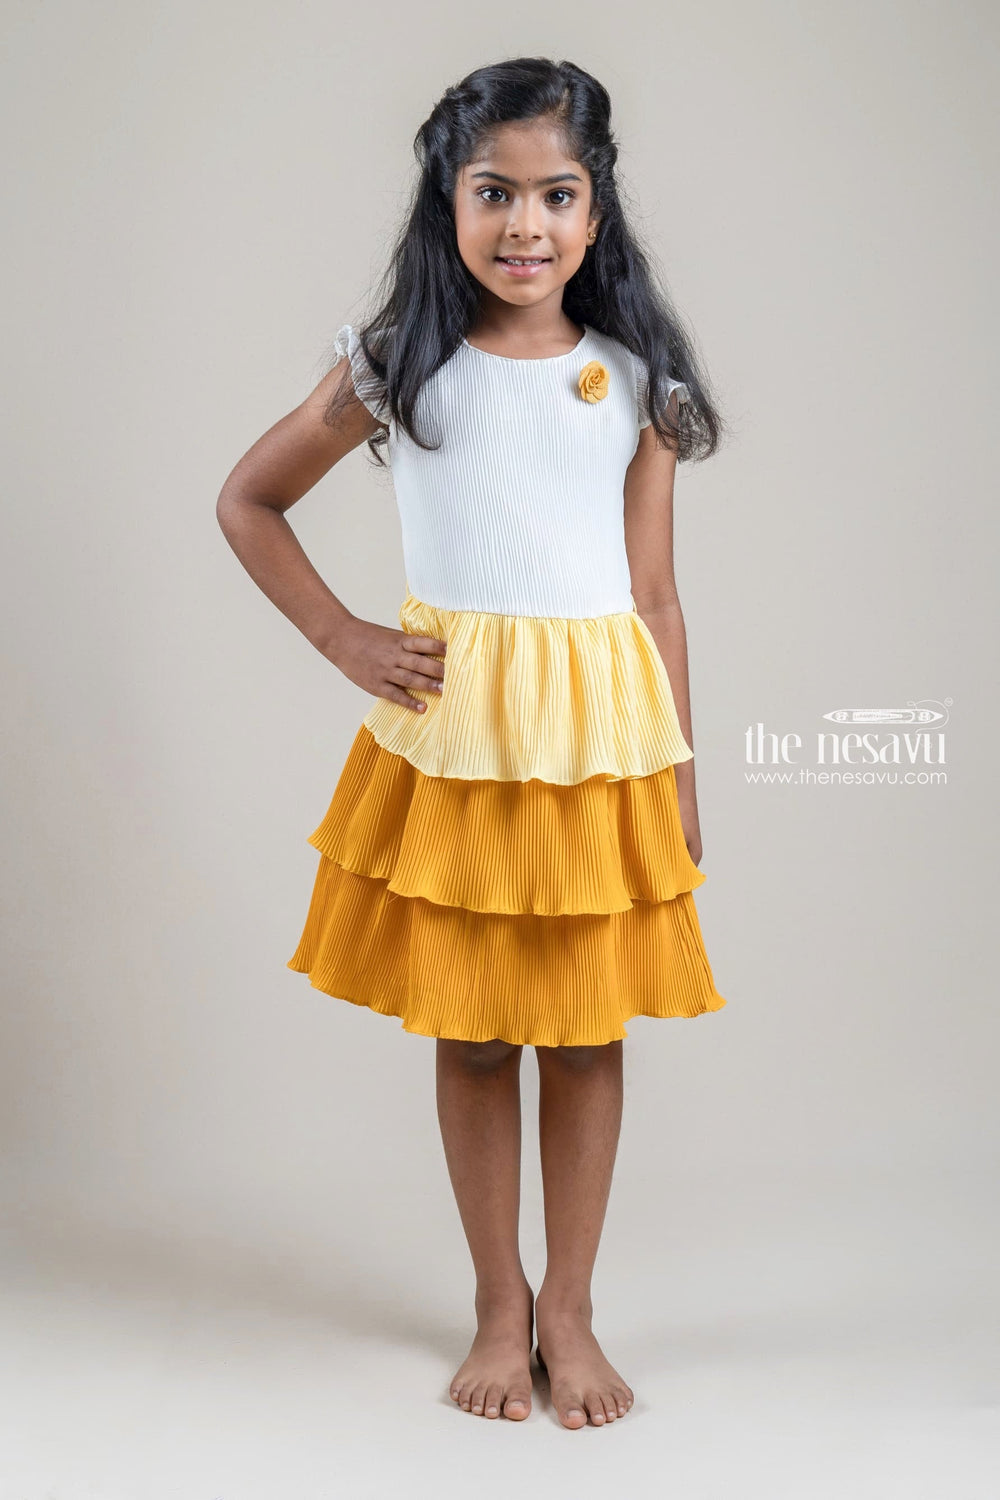 The Nesavu Girls Fancy Frock Dazzling Half White Yoke and Ombre Dyed Layered Casual Frock for Girls with Hip Belt Nesavu Dazzling Half White Yoke and Ombre Dyed Layered Casual Frock with Hip Belt for Girls | Buy Online at The Nesavu